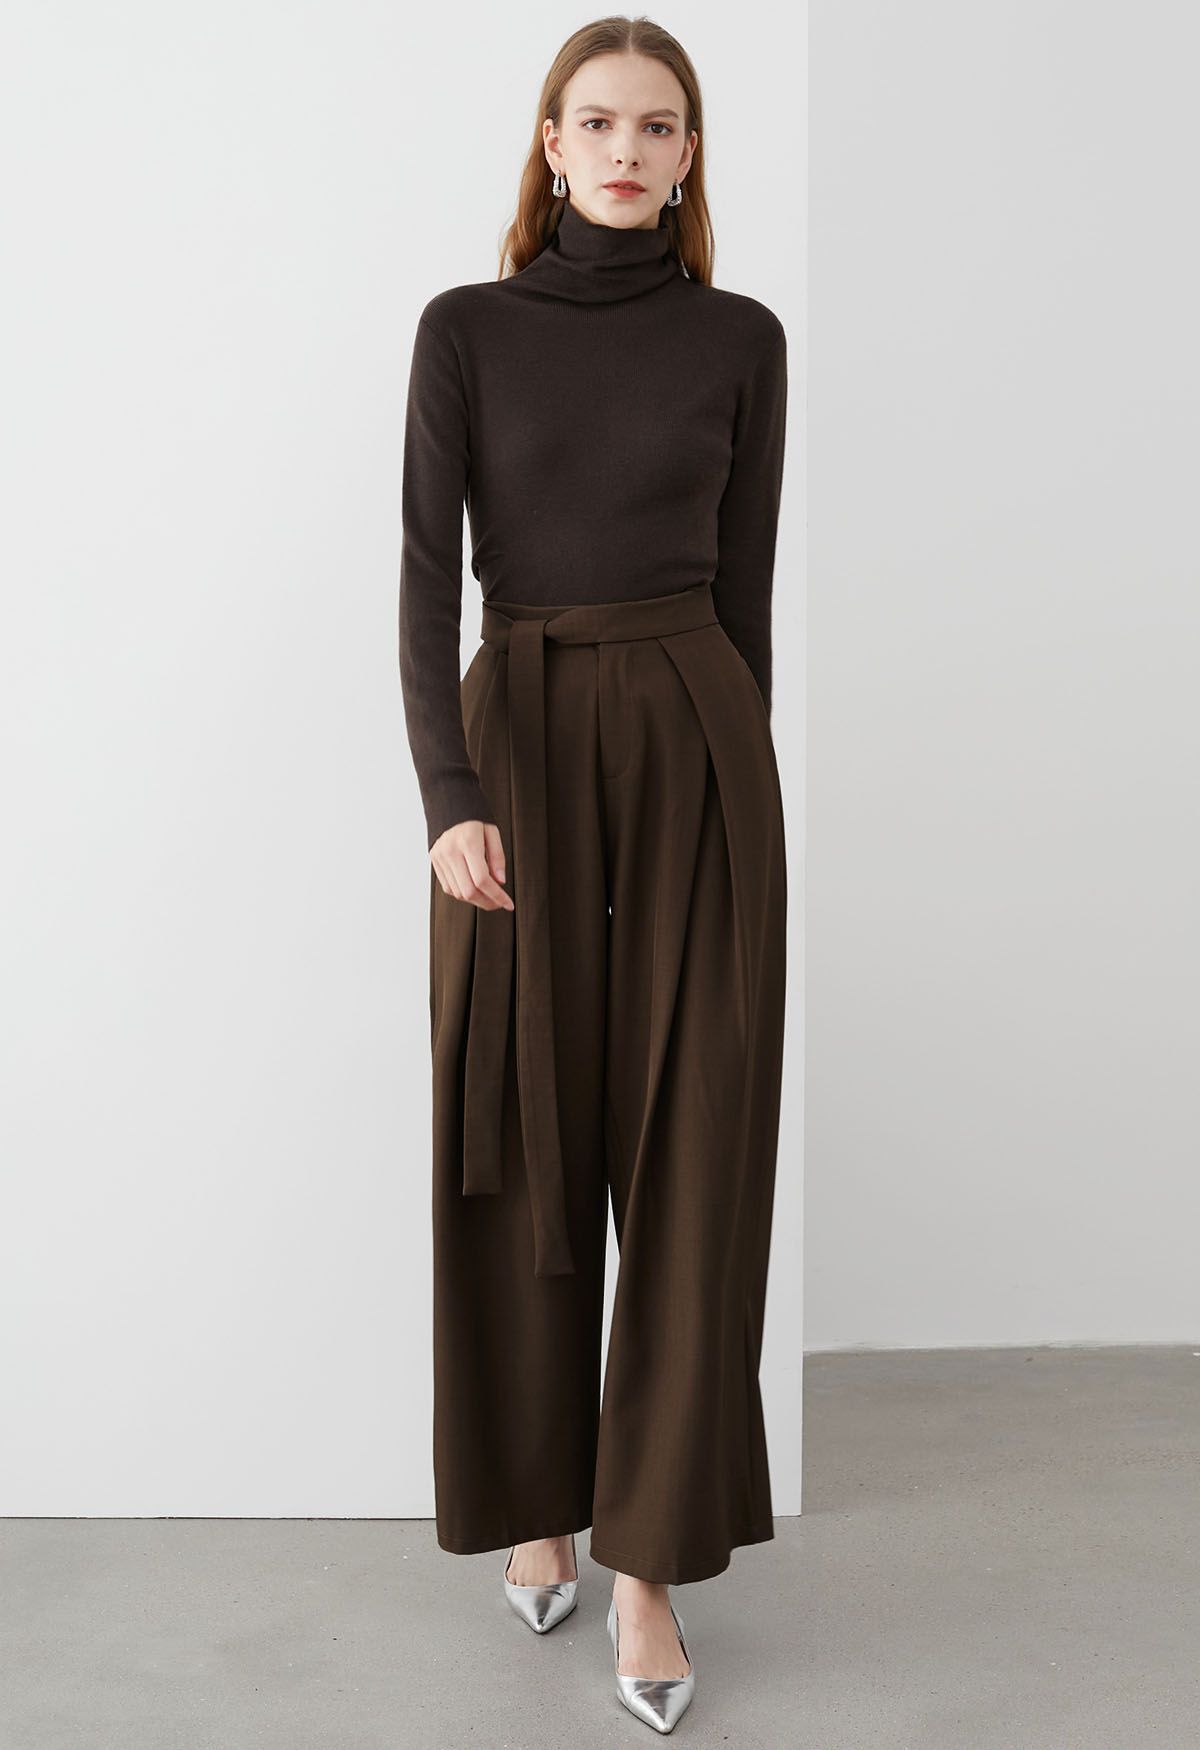 Fixed Belted Side Pockets Straight-Leg Pants in Brown - Retro, Indie ...